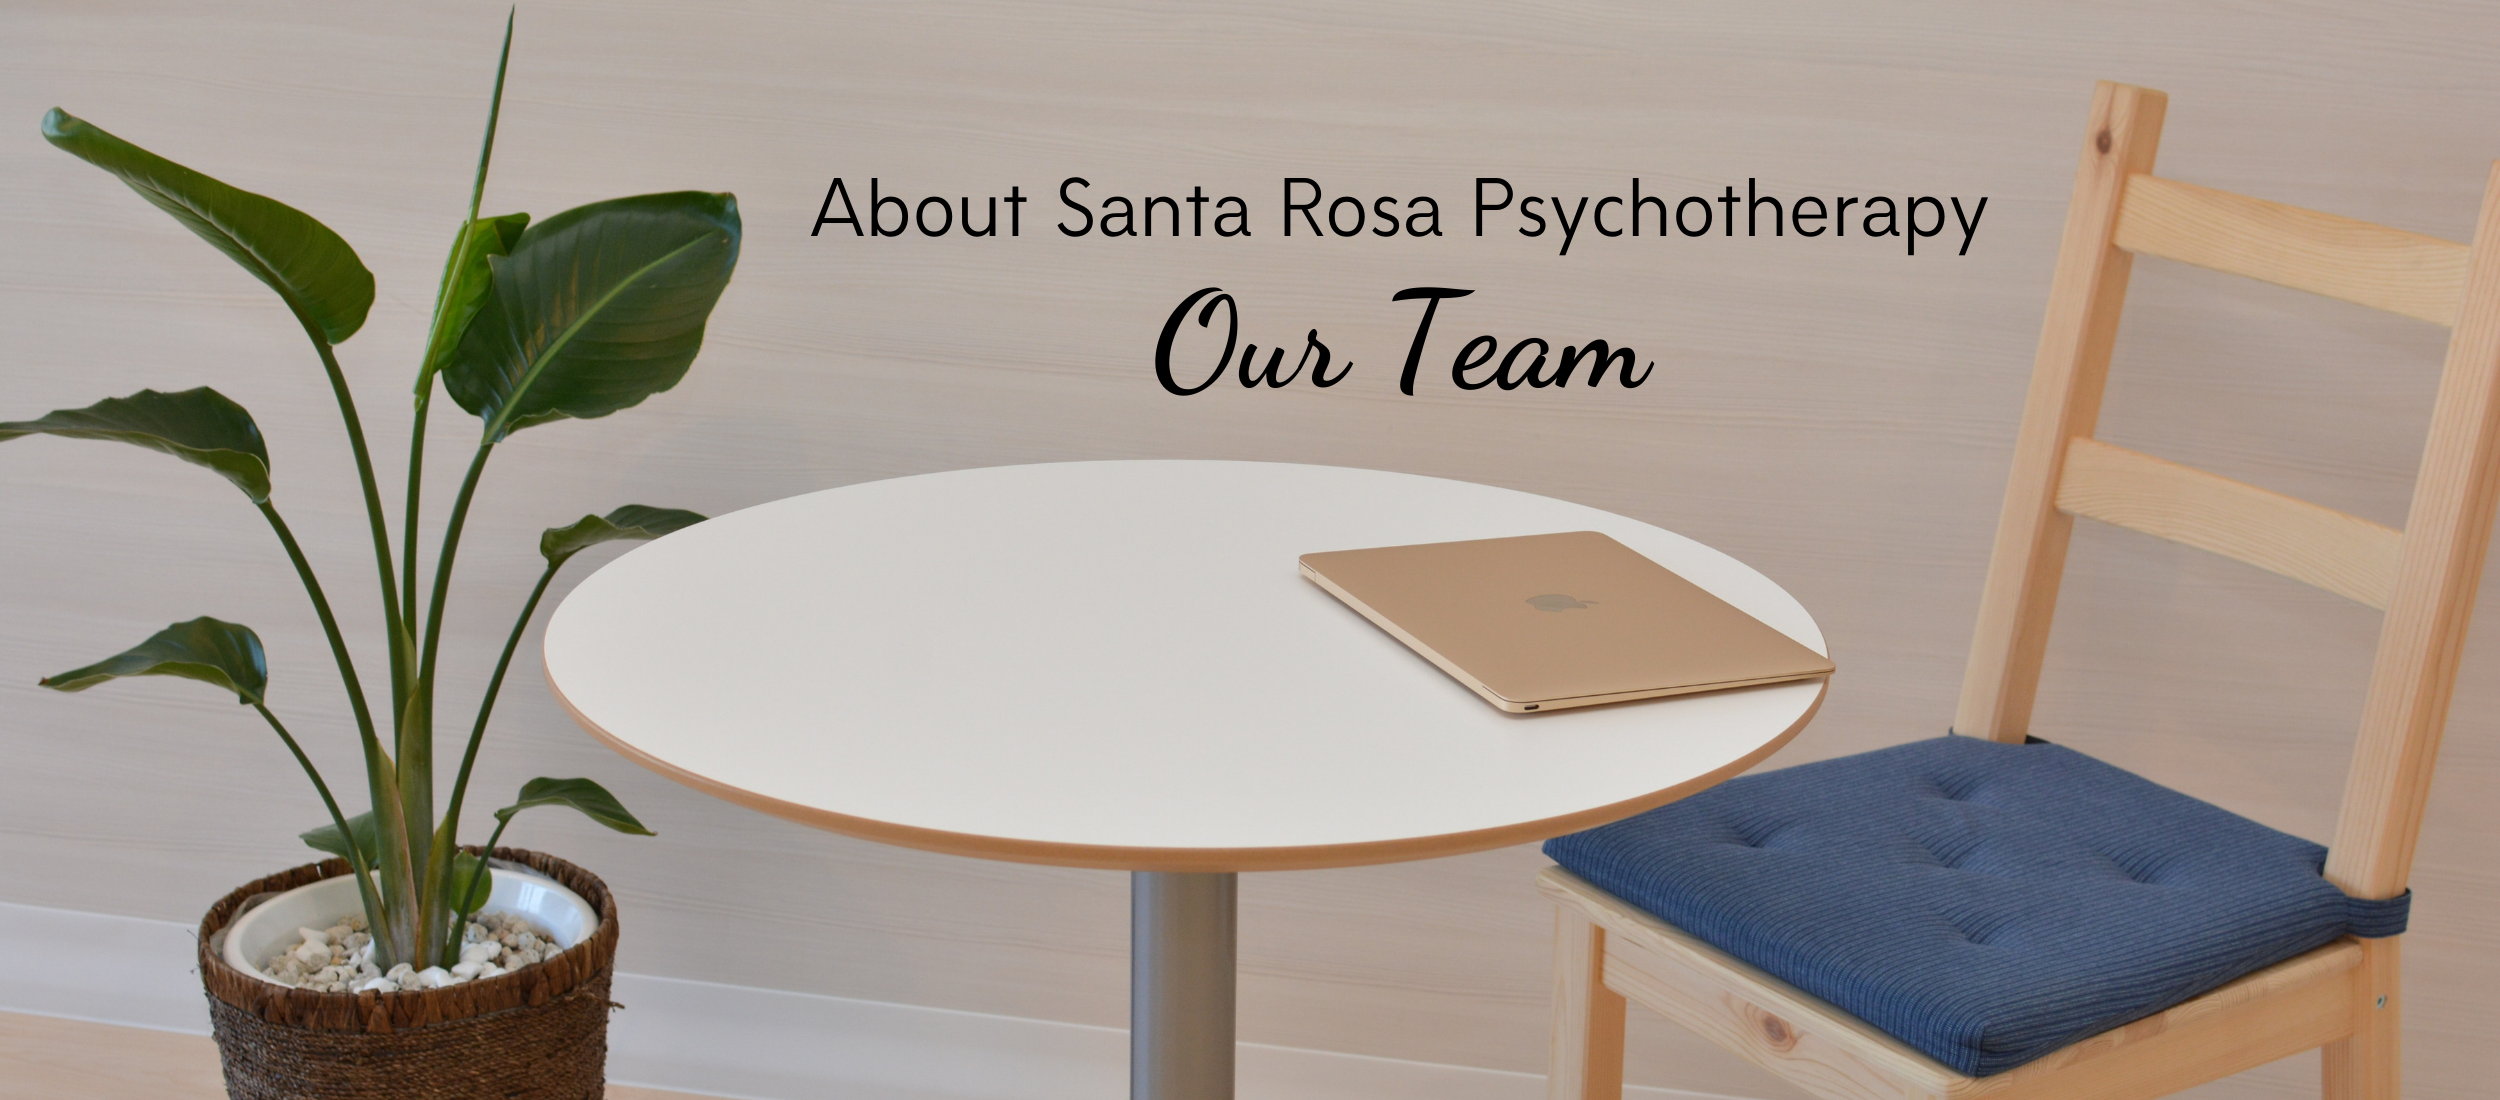 header image that reads: About Santa Rosa Psychotherapy. Our team.